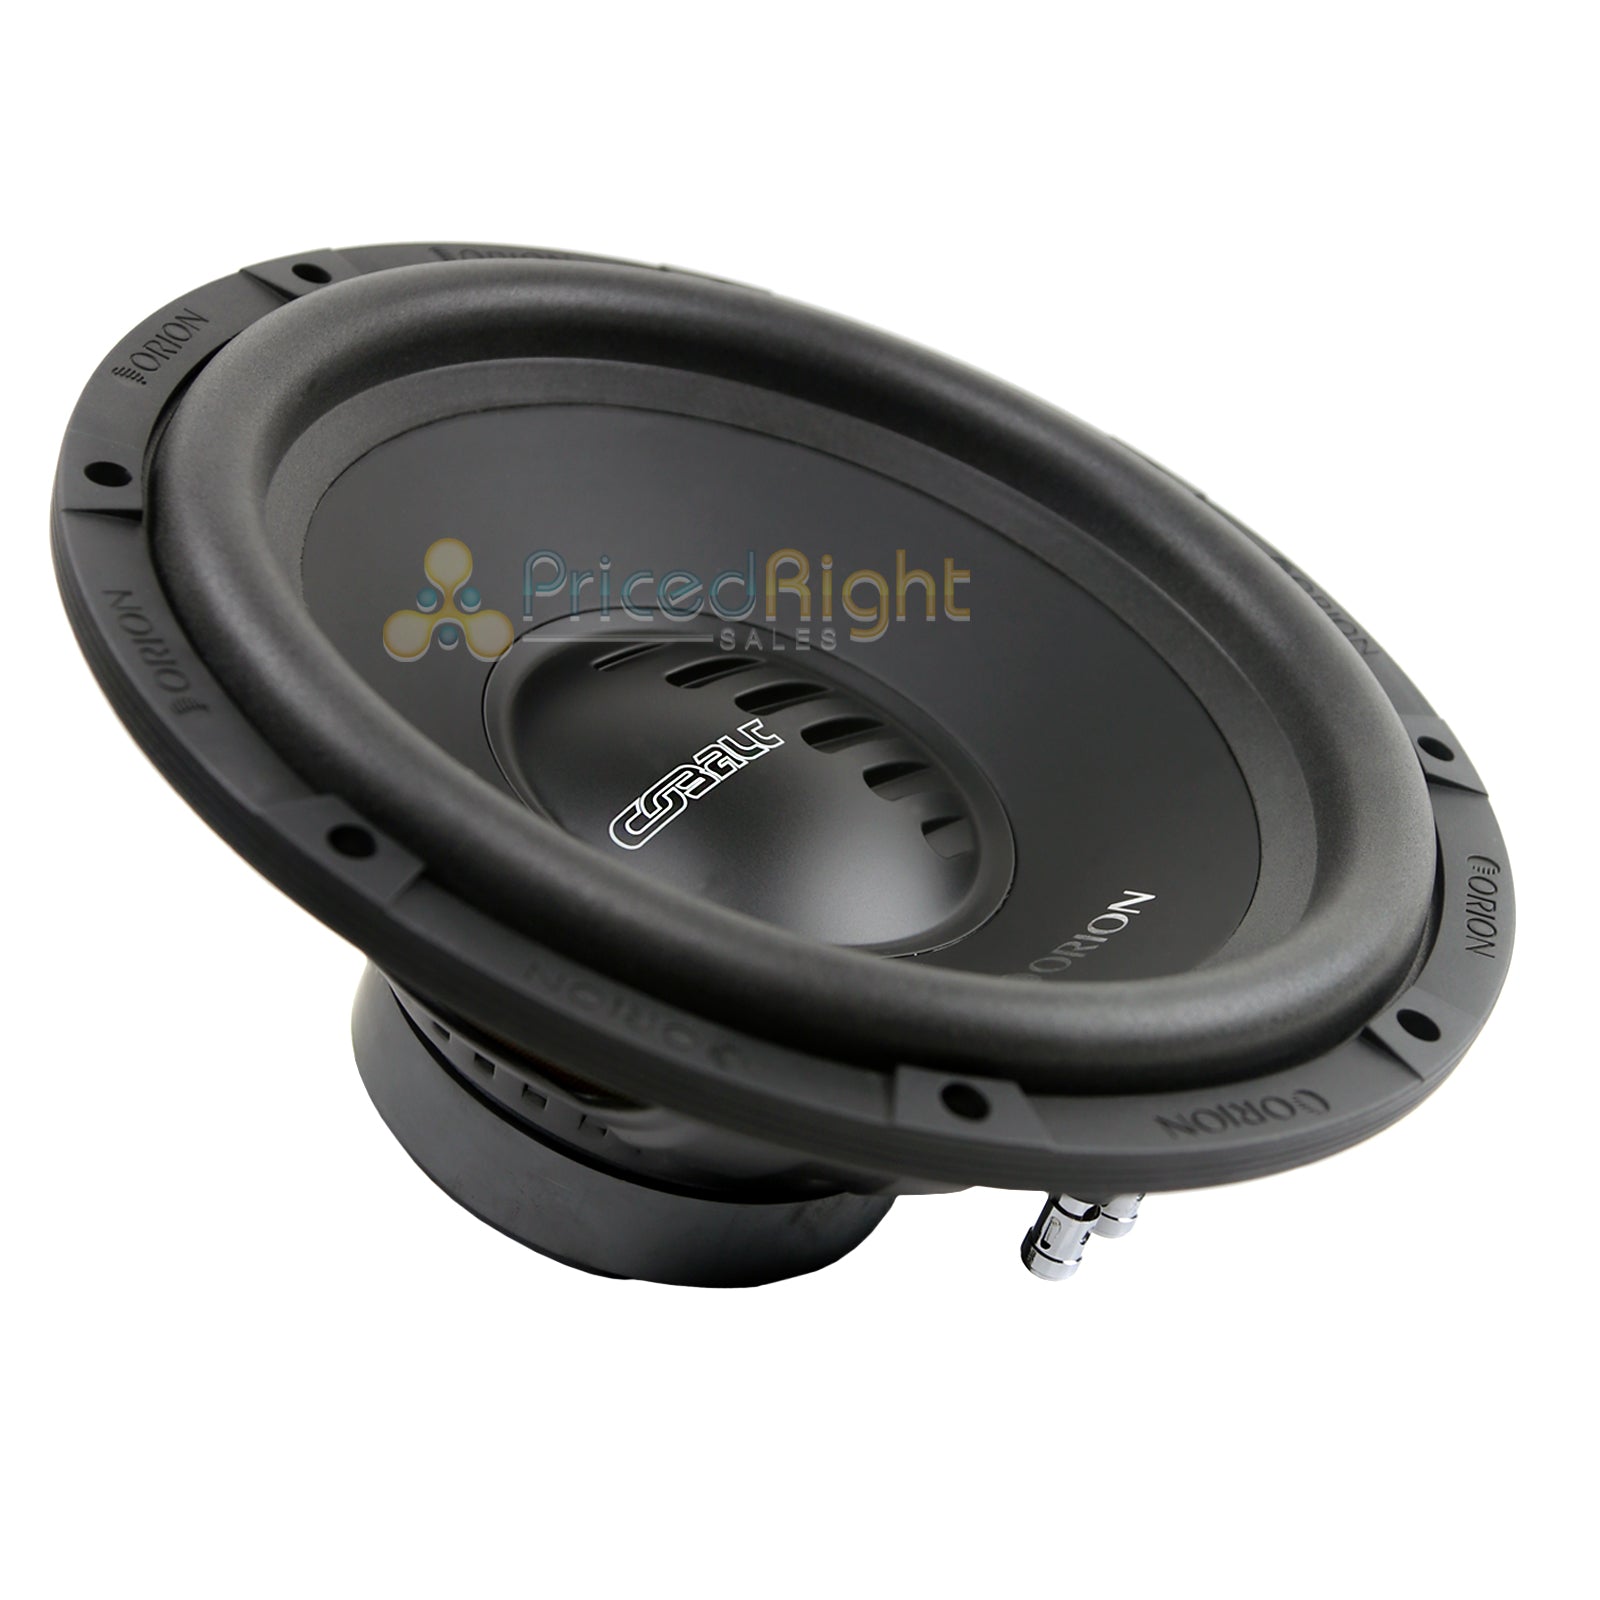 2 Pack Orion Cobalt CO124S Series 12 Inch 1400 Watt Max 4 Ohm Single Subwoofer